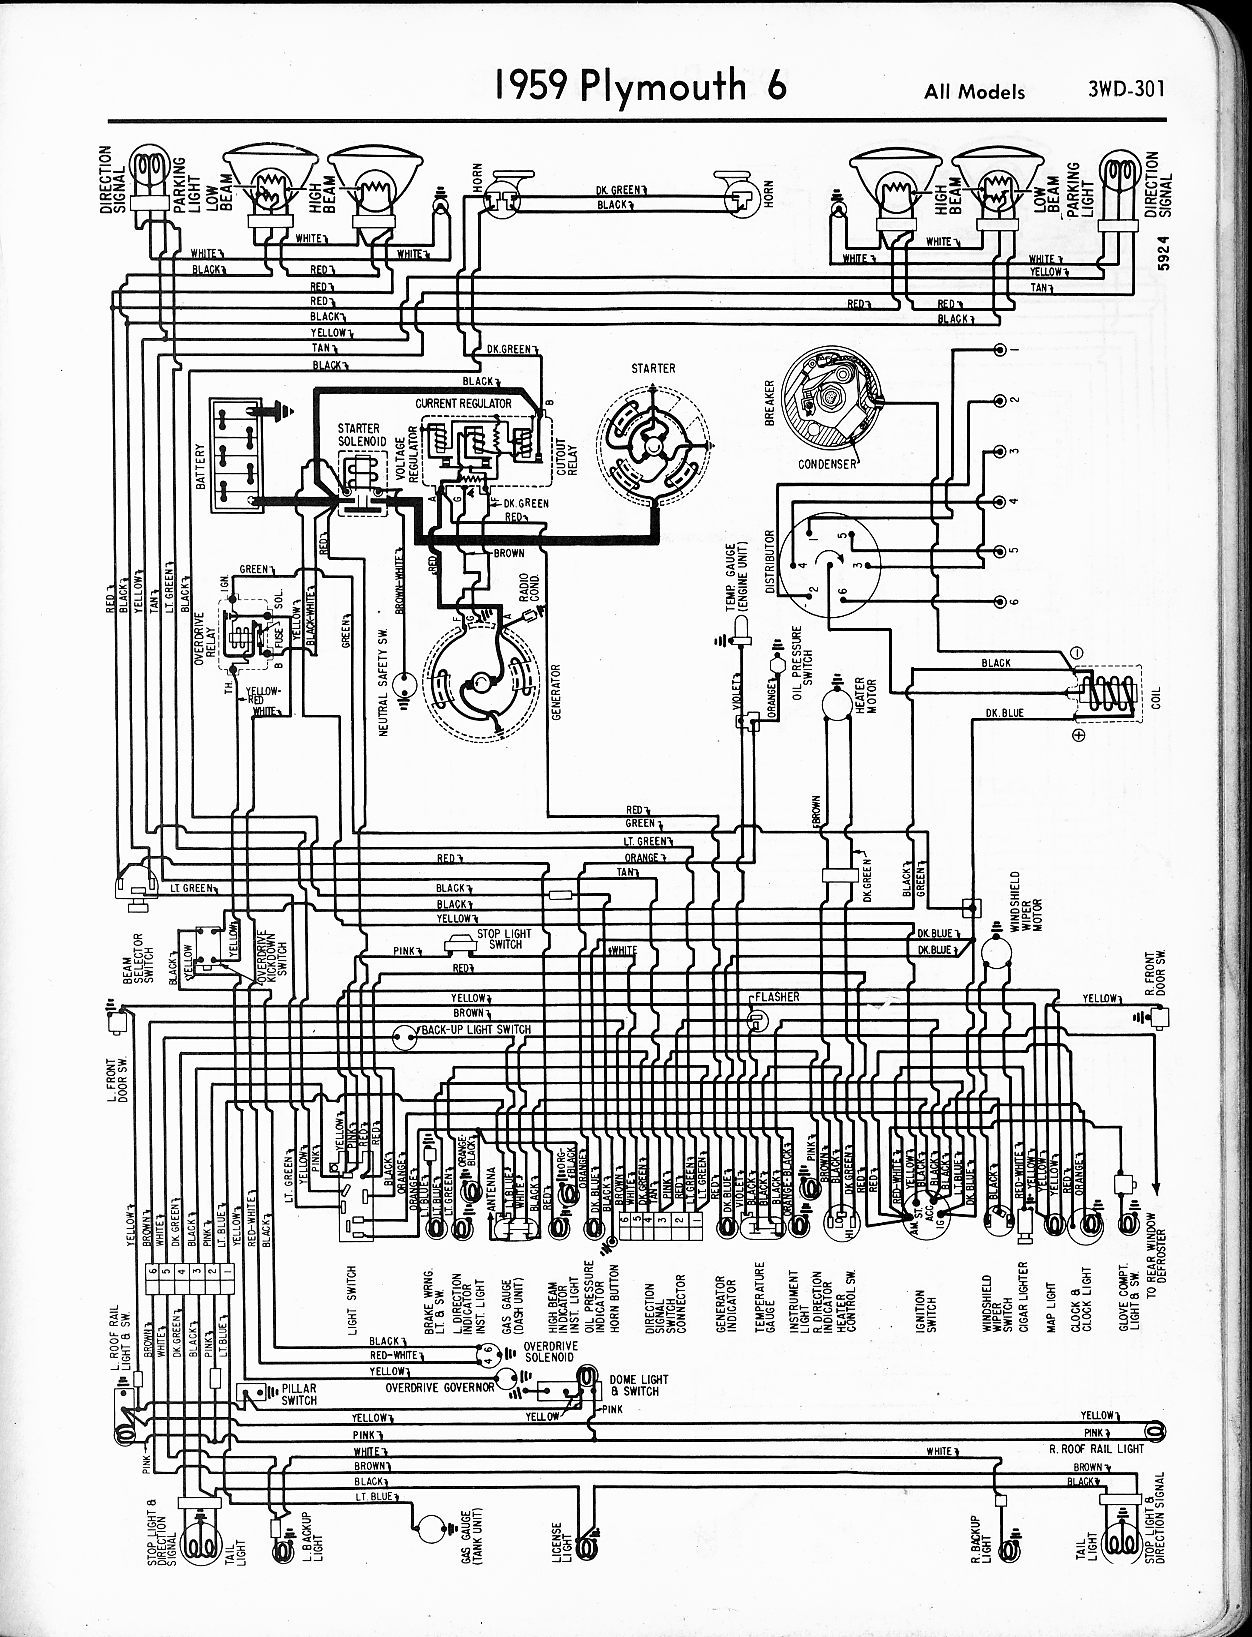 1956 - 1965 Plymouth Wiring - The Old Car Manual Project